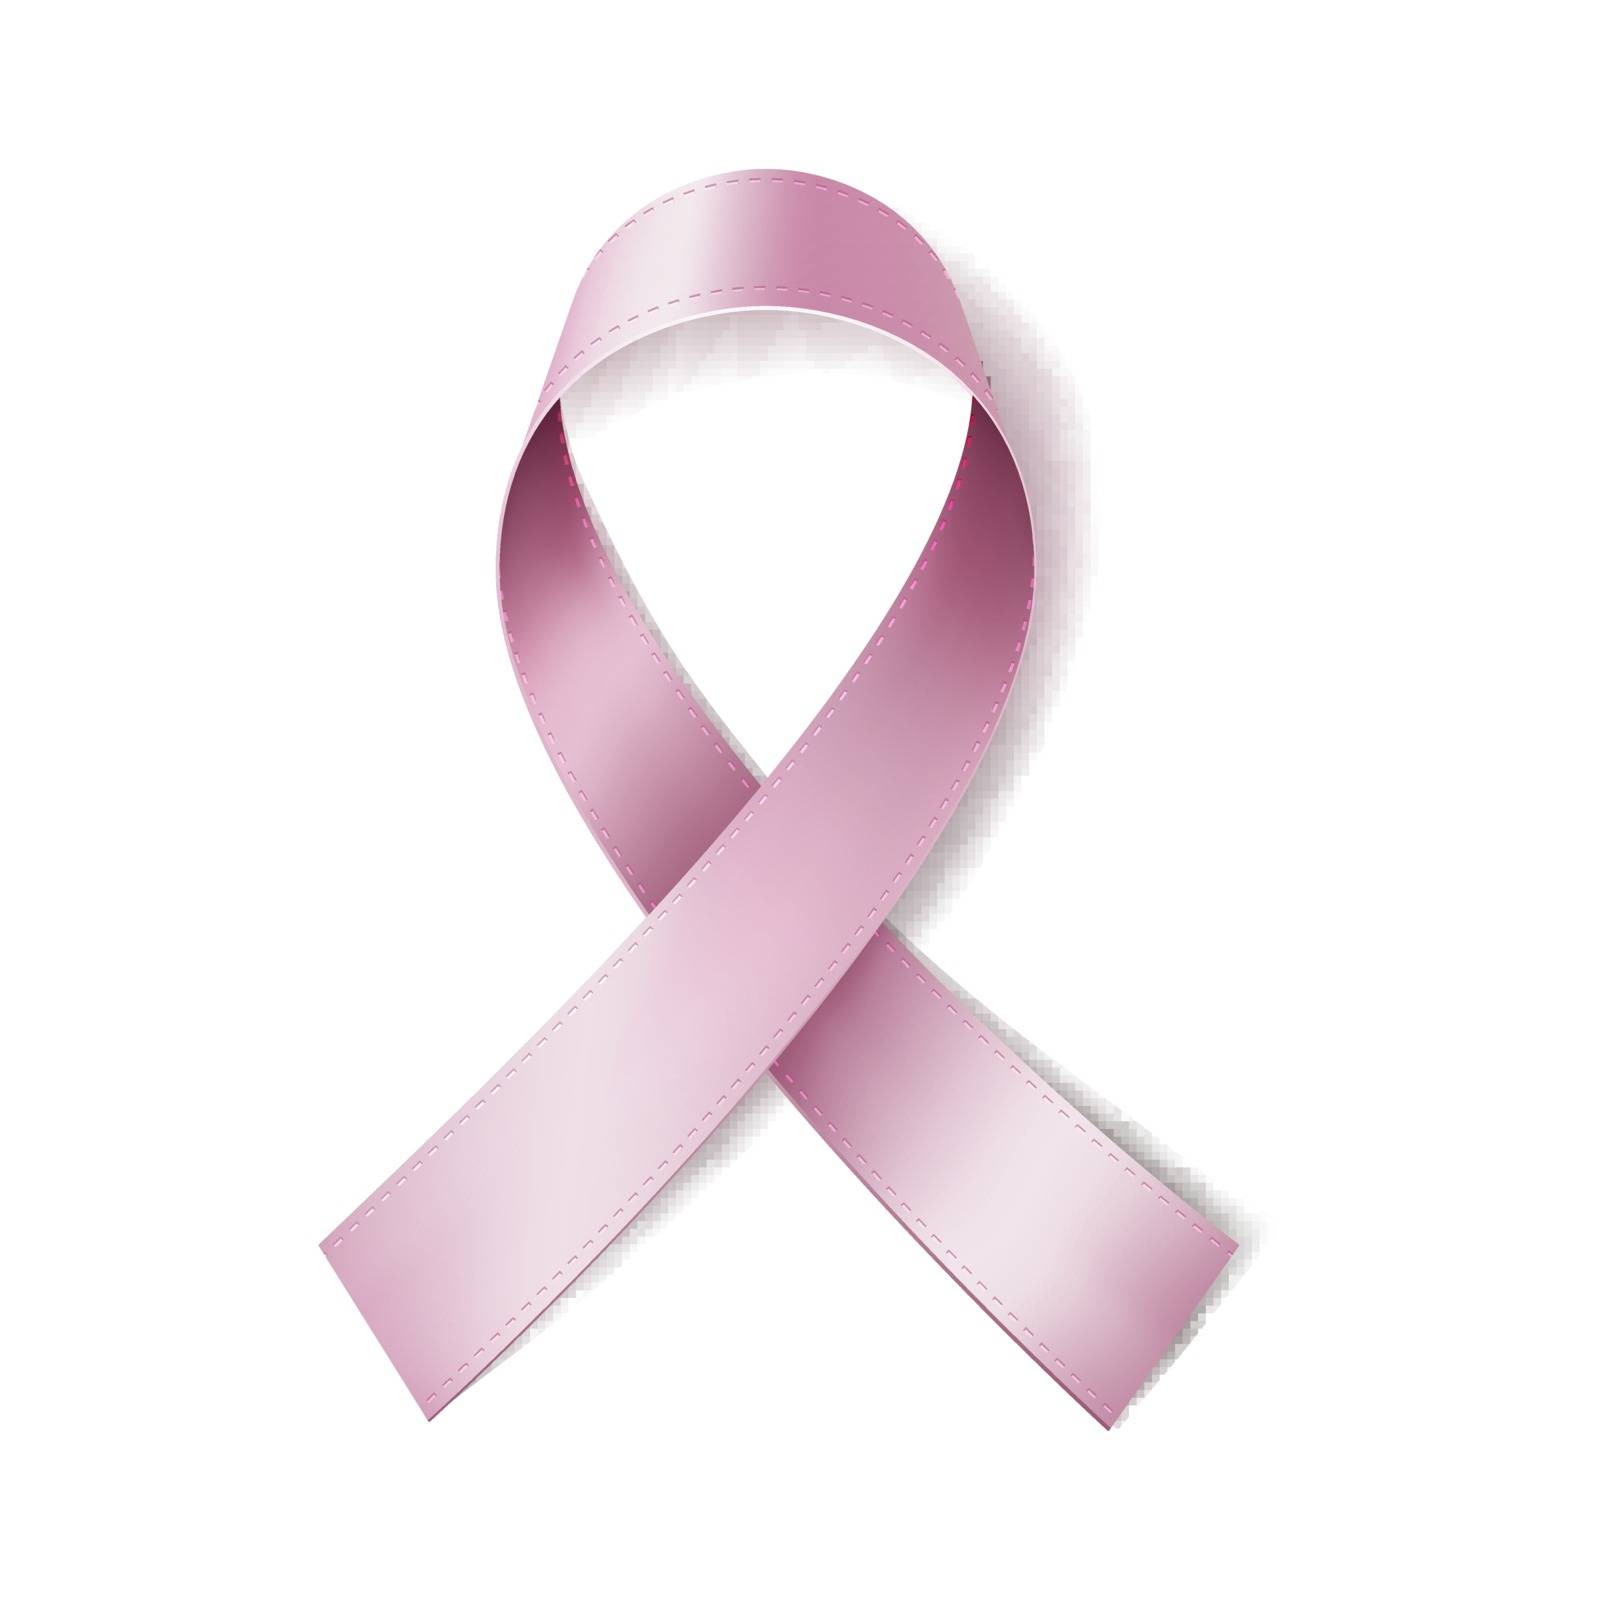 Realistic pink ribbon, isolated on white background. Breast cancer awareness symbol, Fight Against Cancer concept. Vector illustration, eps10.